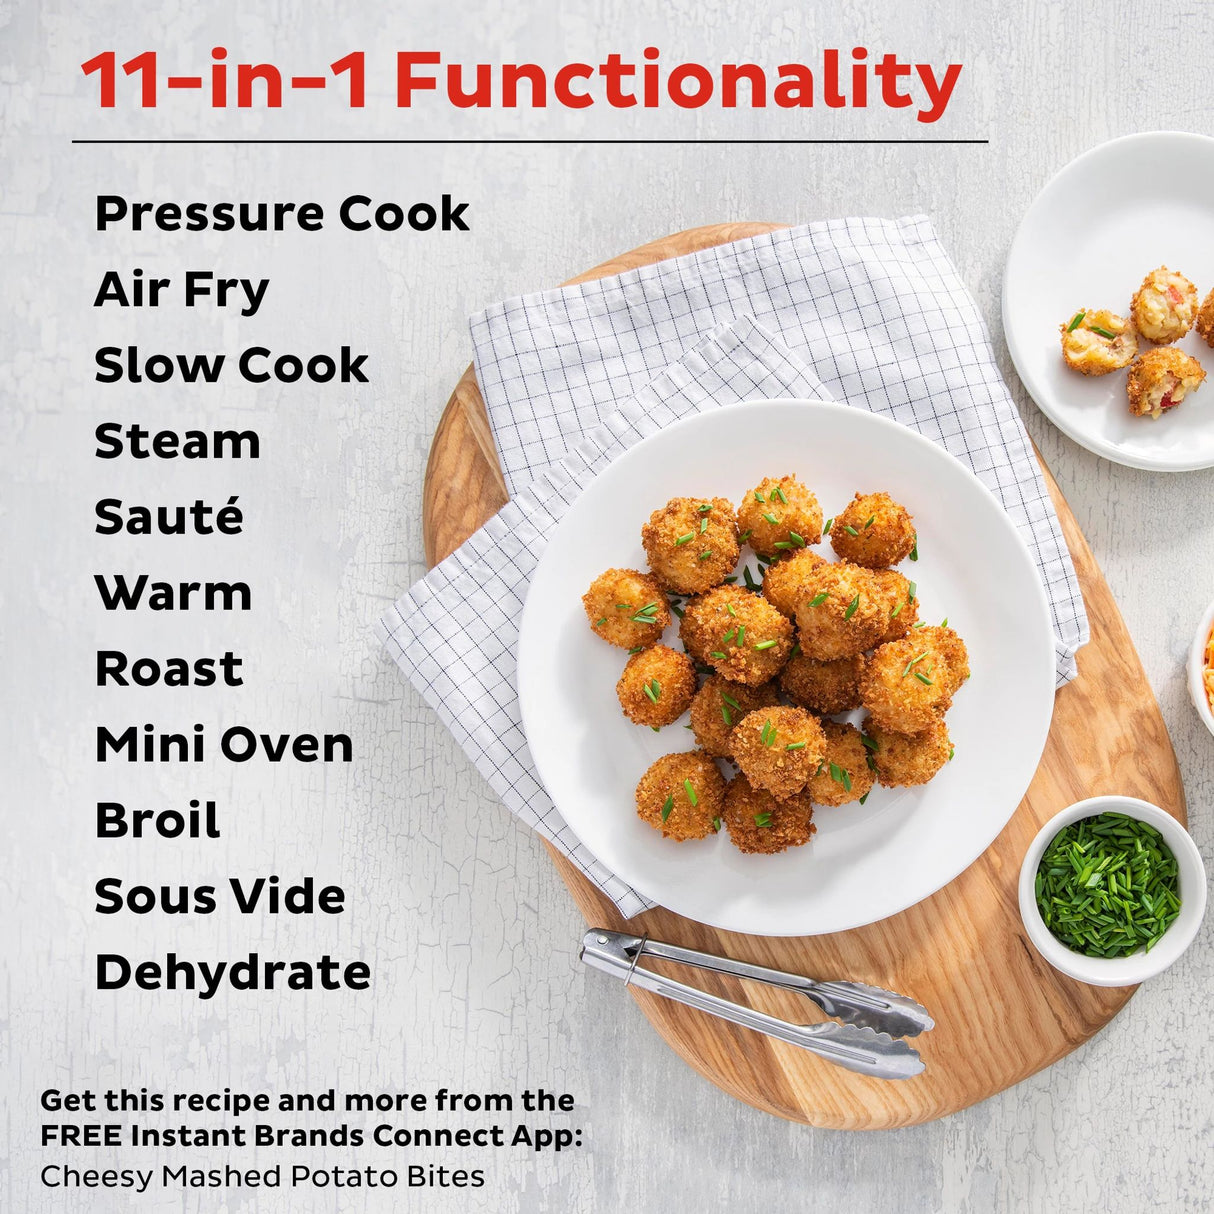  Instant Pot® Pro™ Crisp &amp; Air Fryer 8-qt Multi-Use Pressure Cooker &amp; Air Fryer with text 11 in 1 Functionality